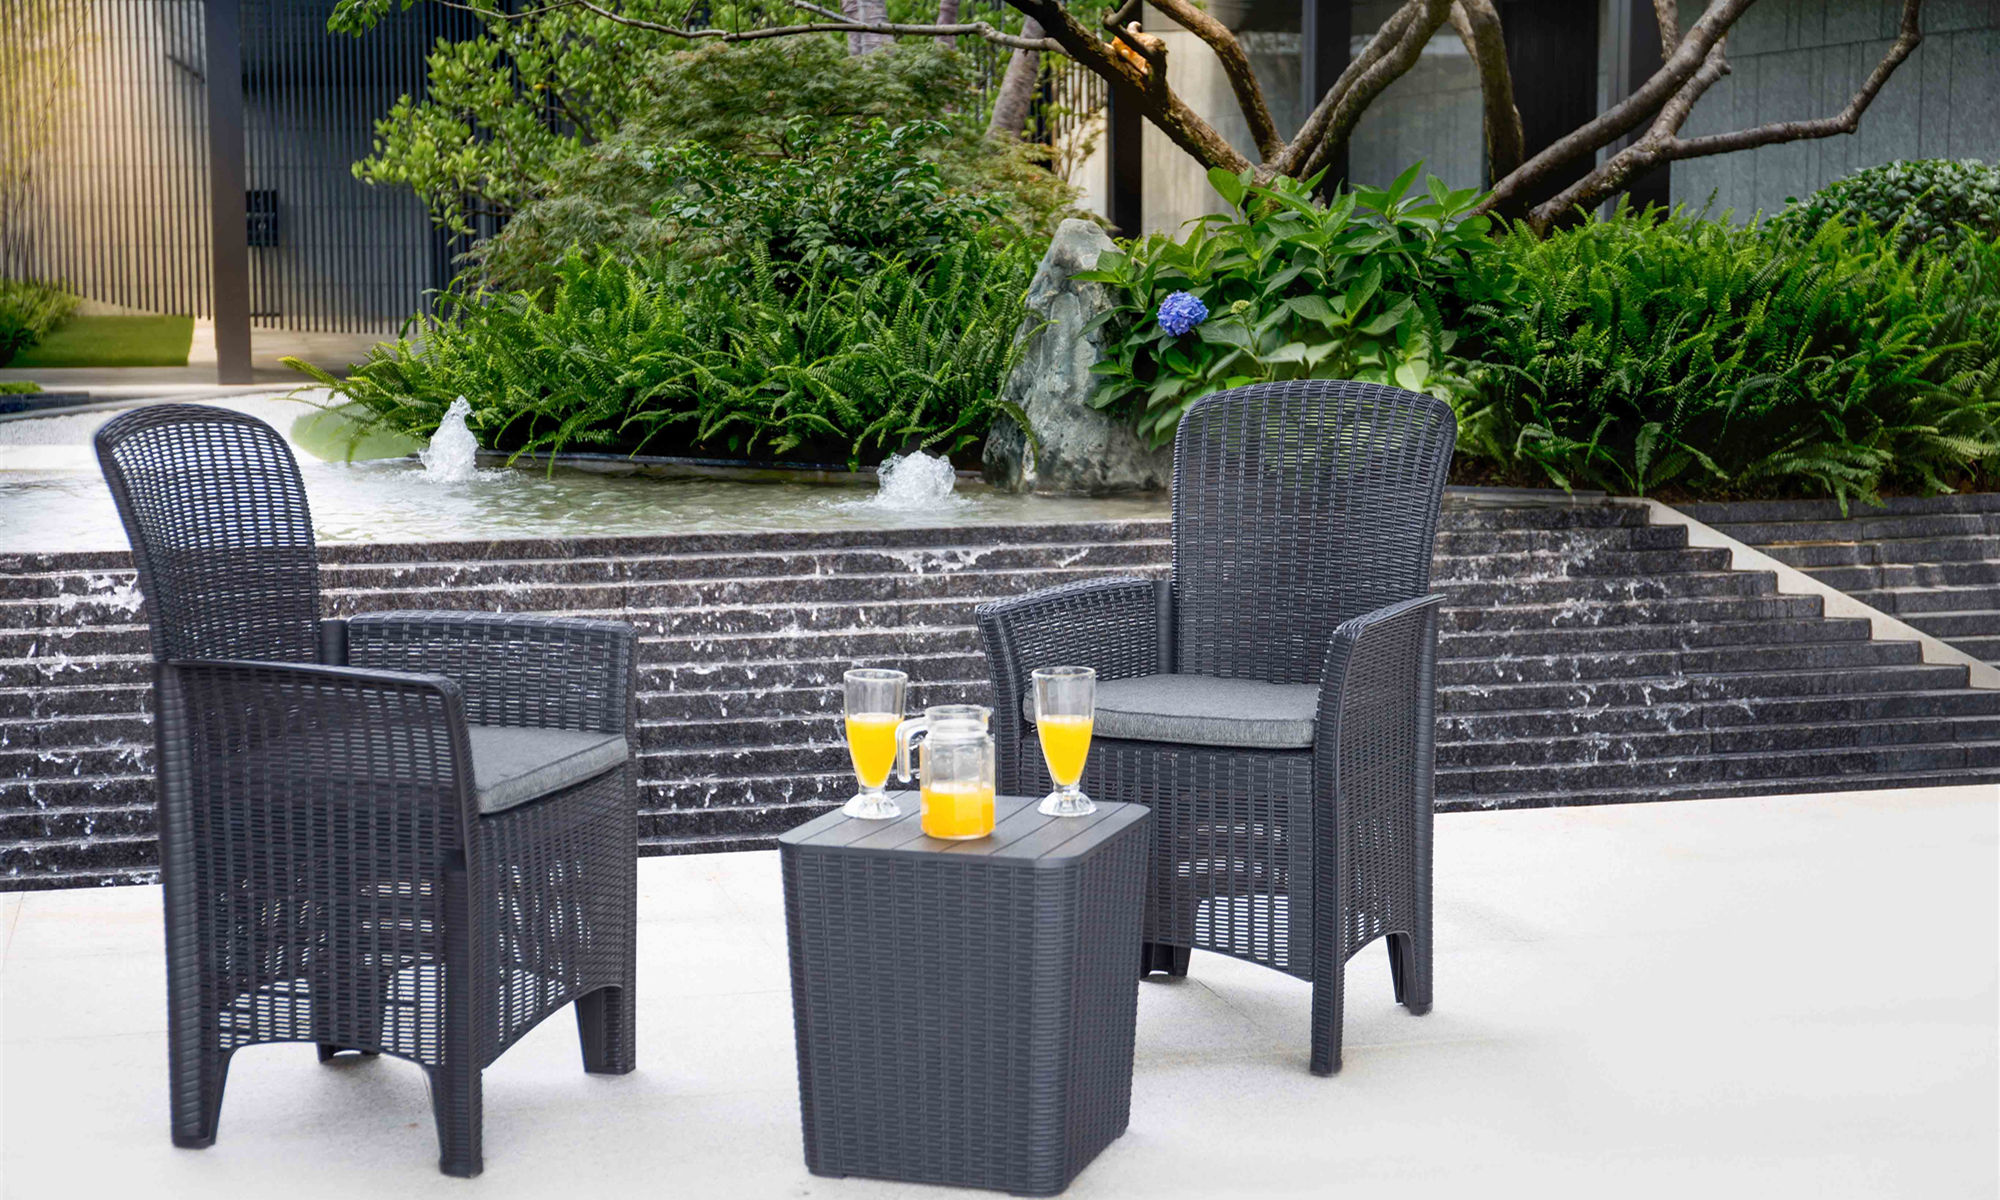 MD-151 /One Plastic wicker dining set